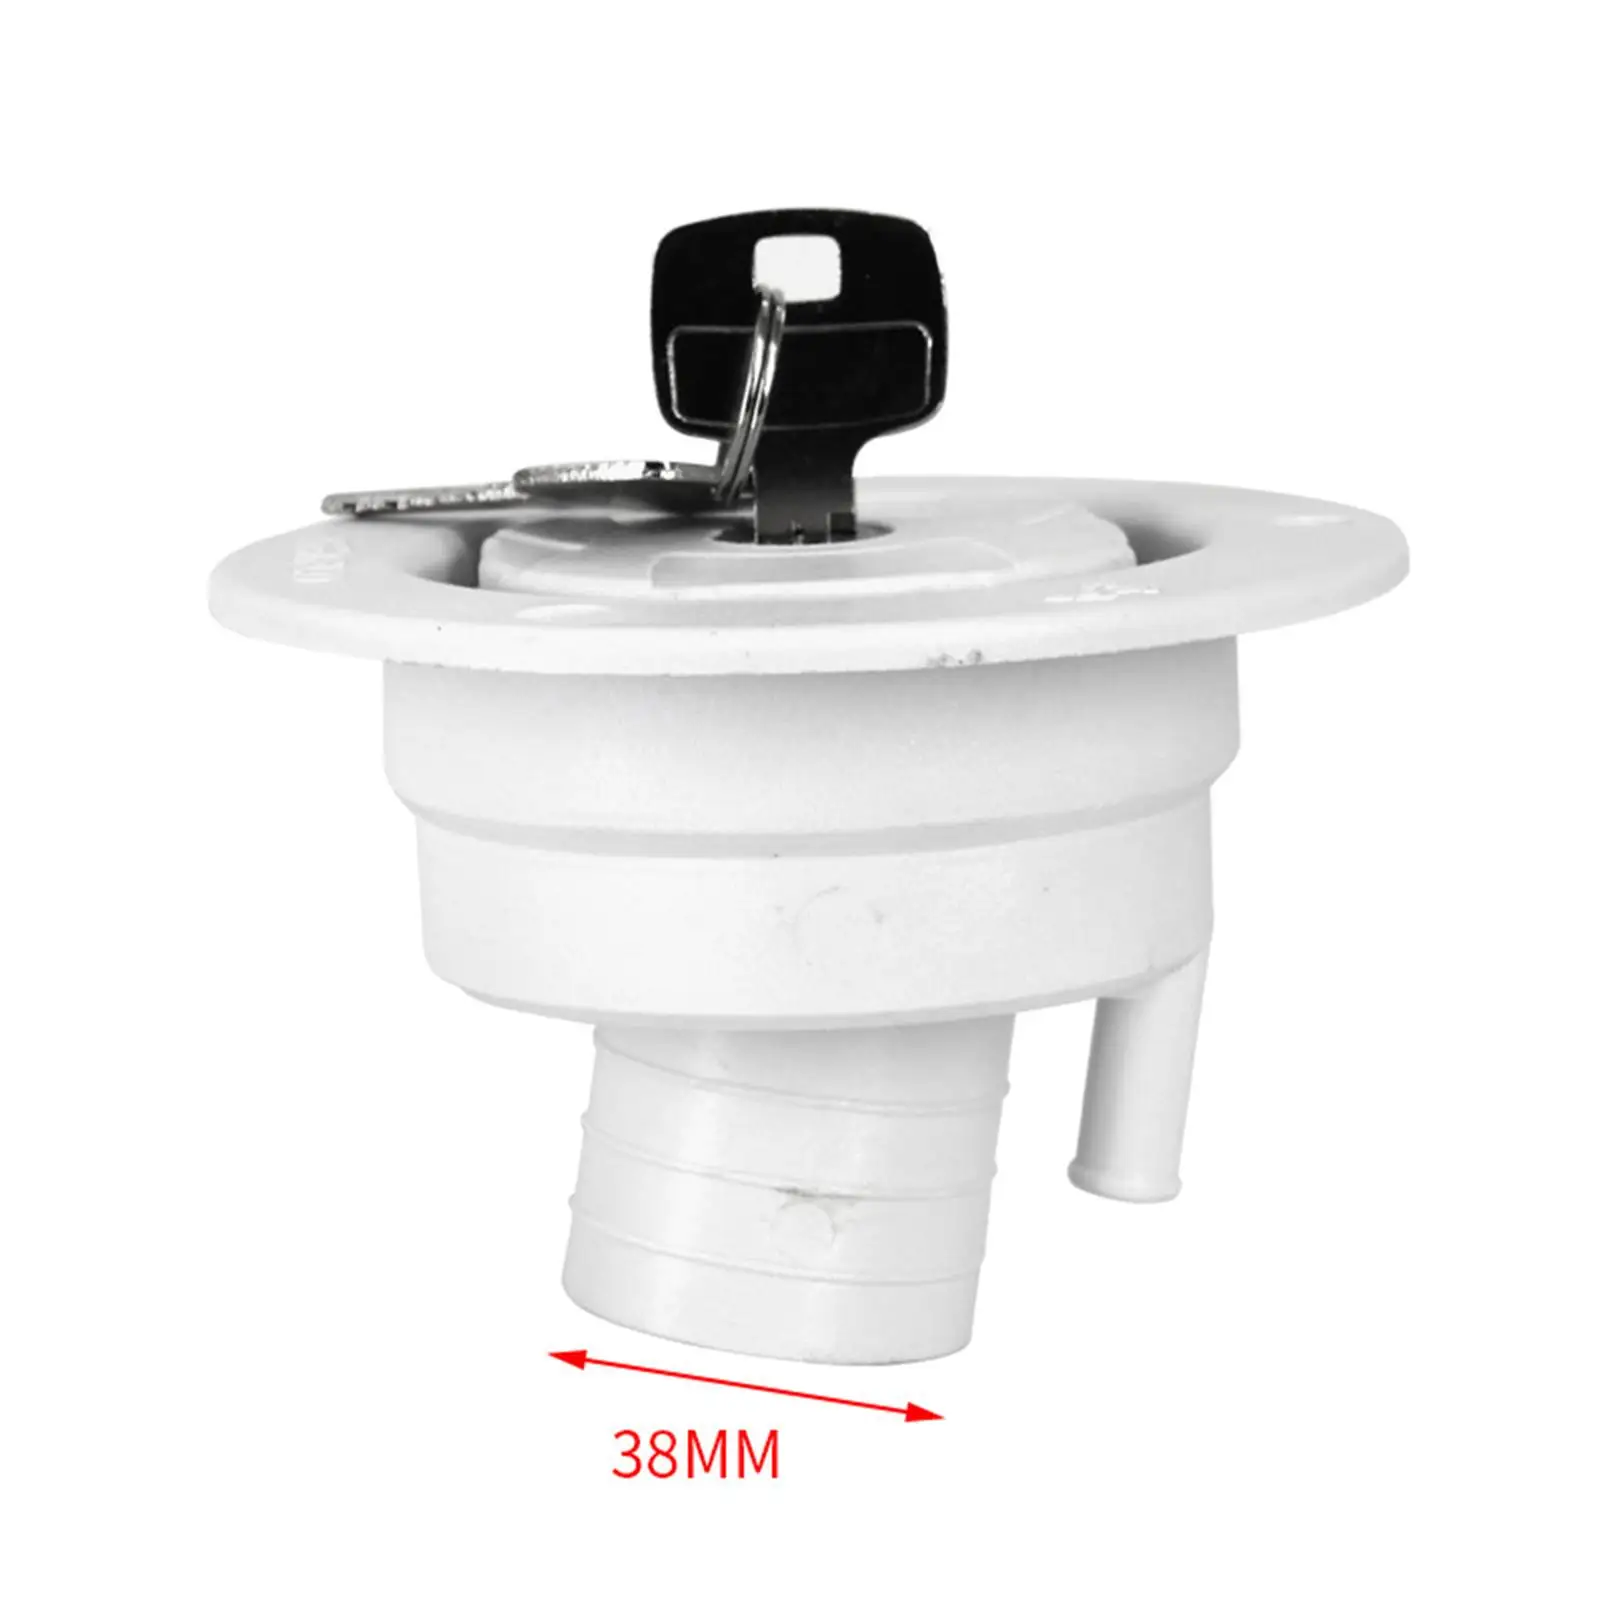 Universal Gravity Fresh Water Hatches Inlet Leakproof with 2 Keys Replace Lockable for Motorhome Camper Boat